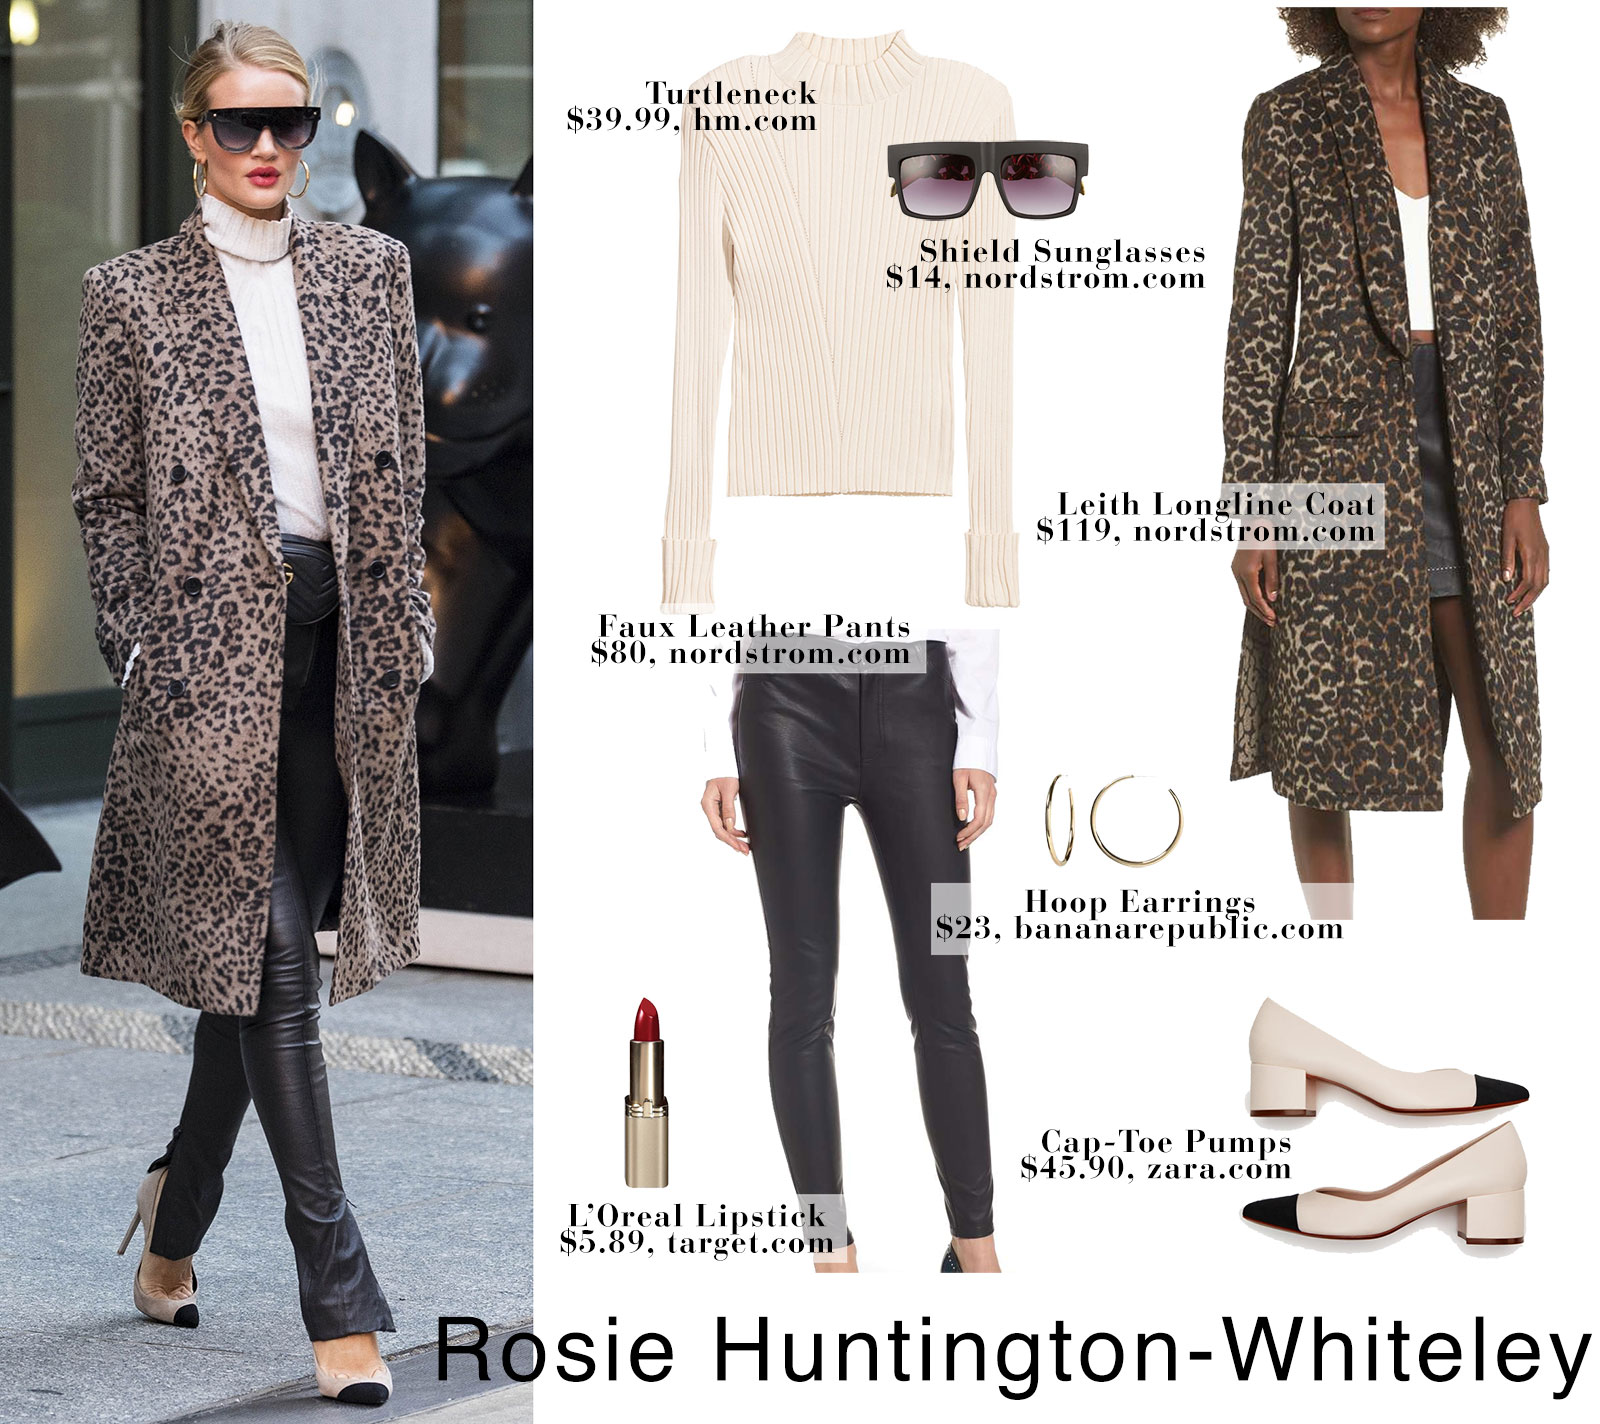 Rosie Huntington-Whiteley wears a leopard coat with leather pants and cap-toe pumps